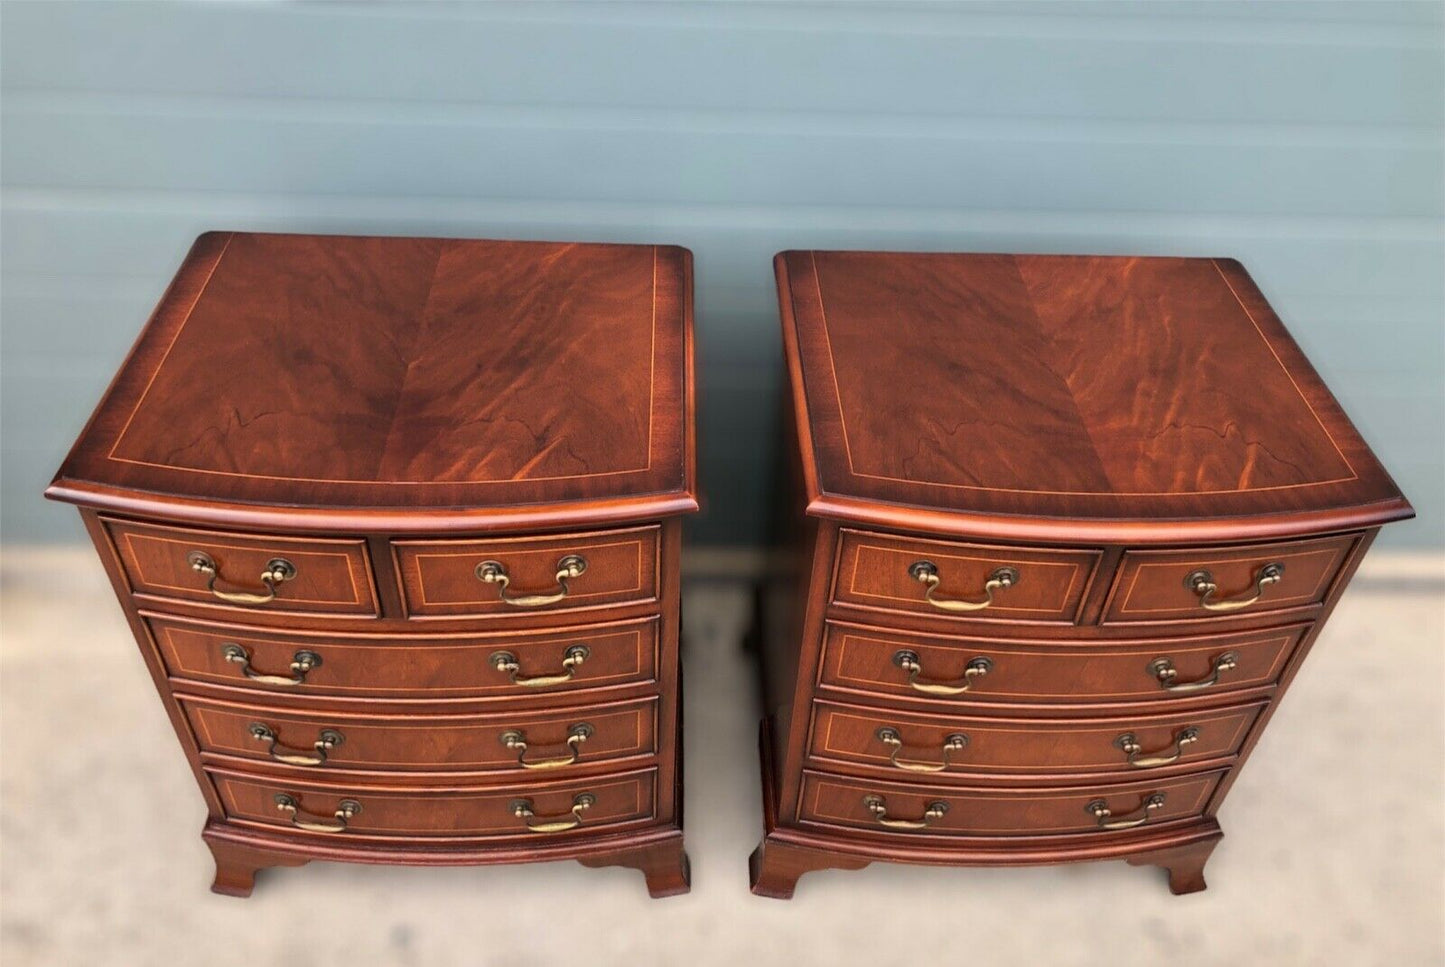 000951....Handsome Pair Vintage Bedside Chests / Small Chests Of Drawers ( sold )